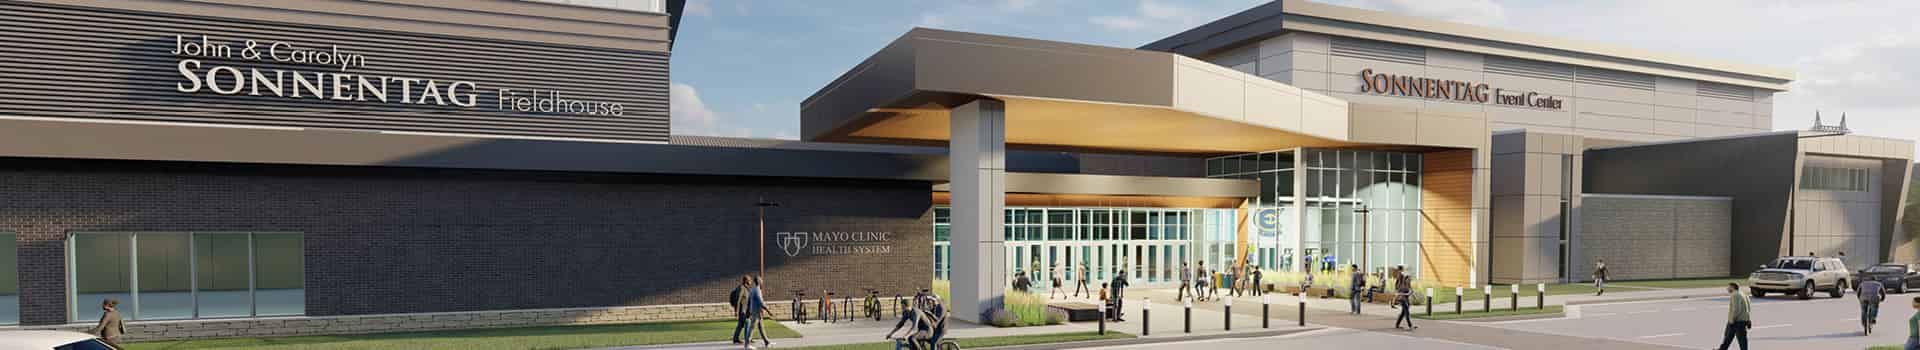 Rendering of Sonnentag Fieldhouse Sports Medicine Complex